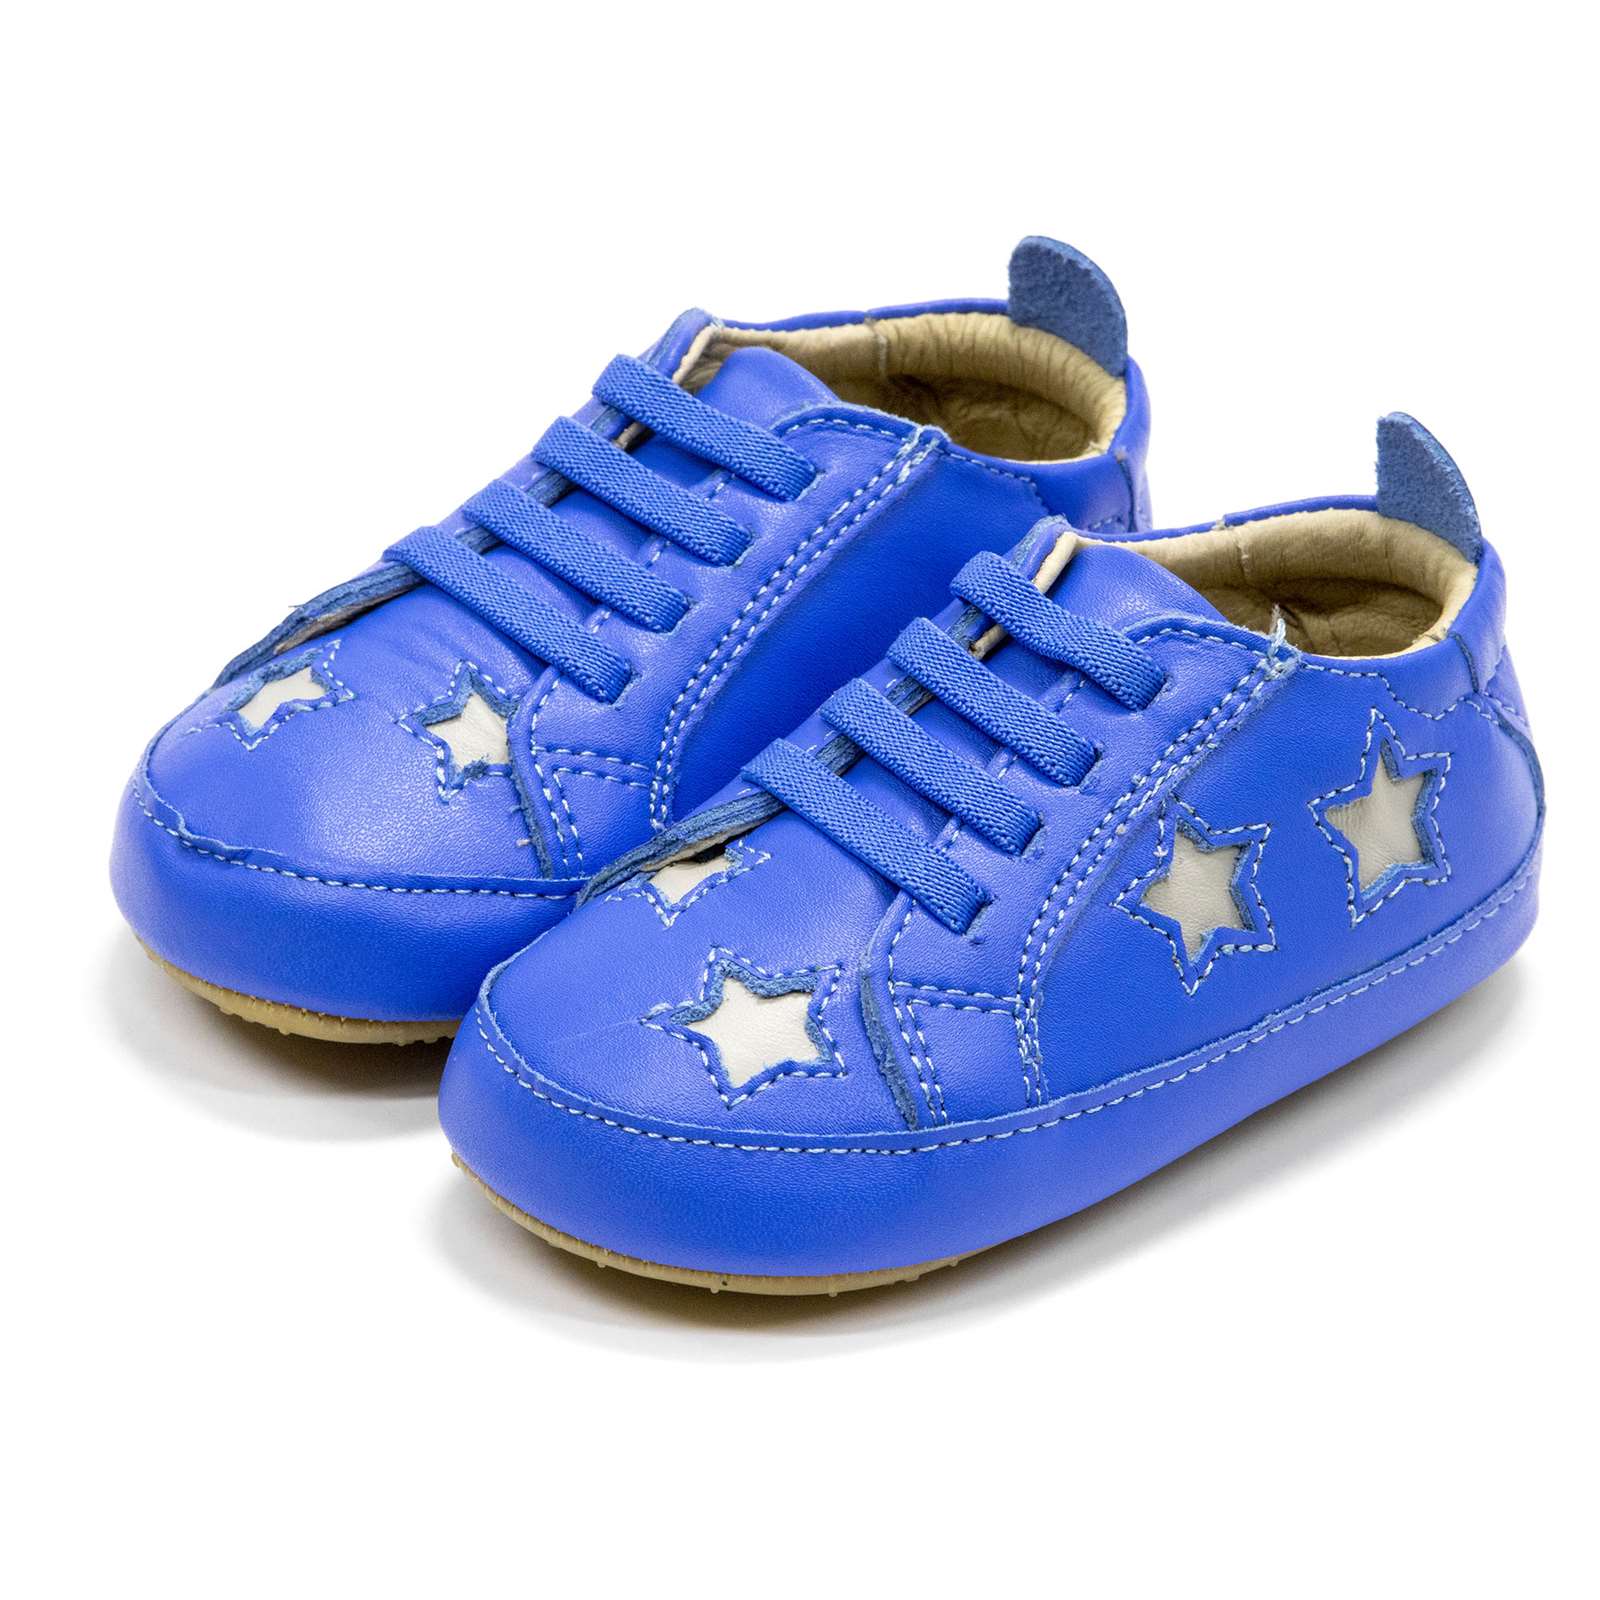 Old Soles Toddler Starey Bambini Comfort Shoes